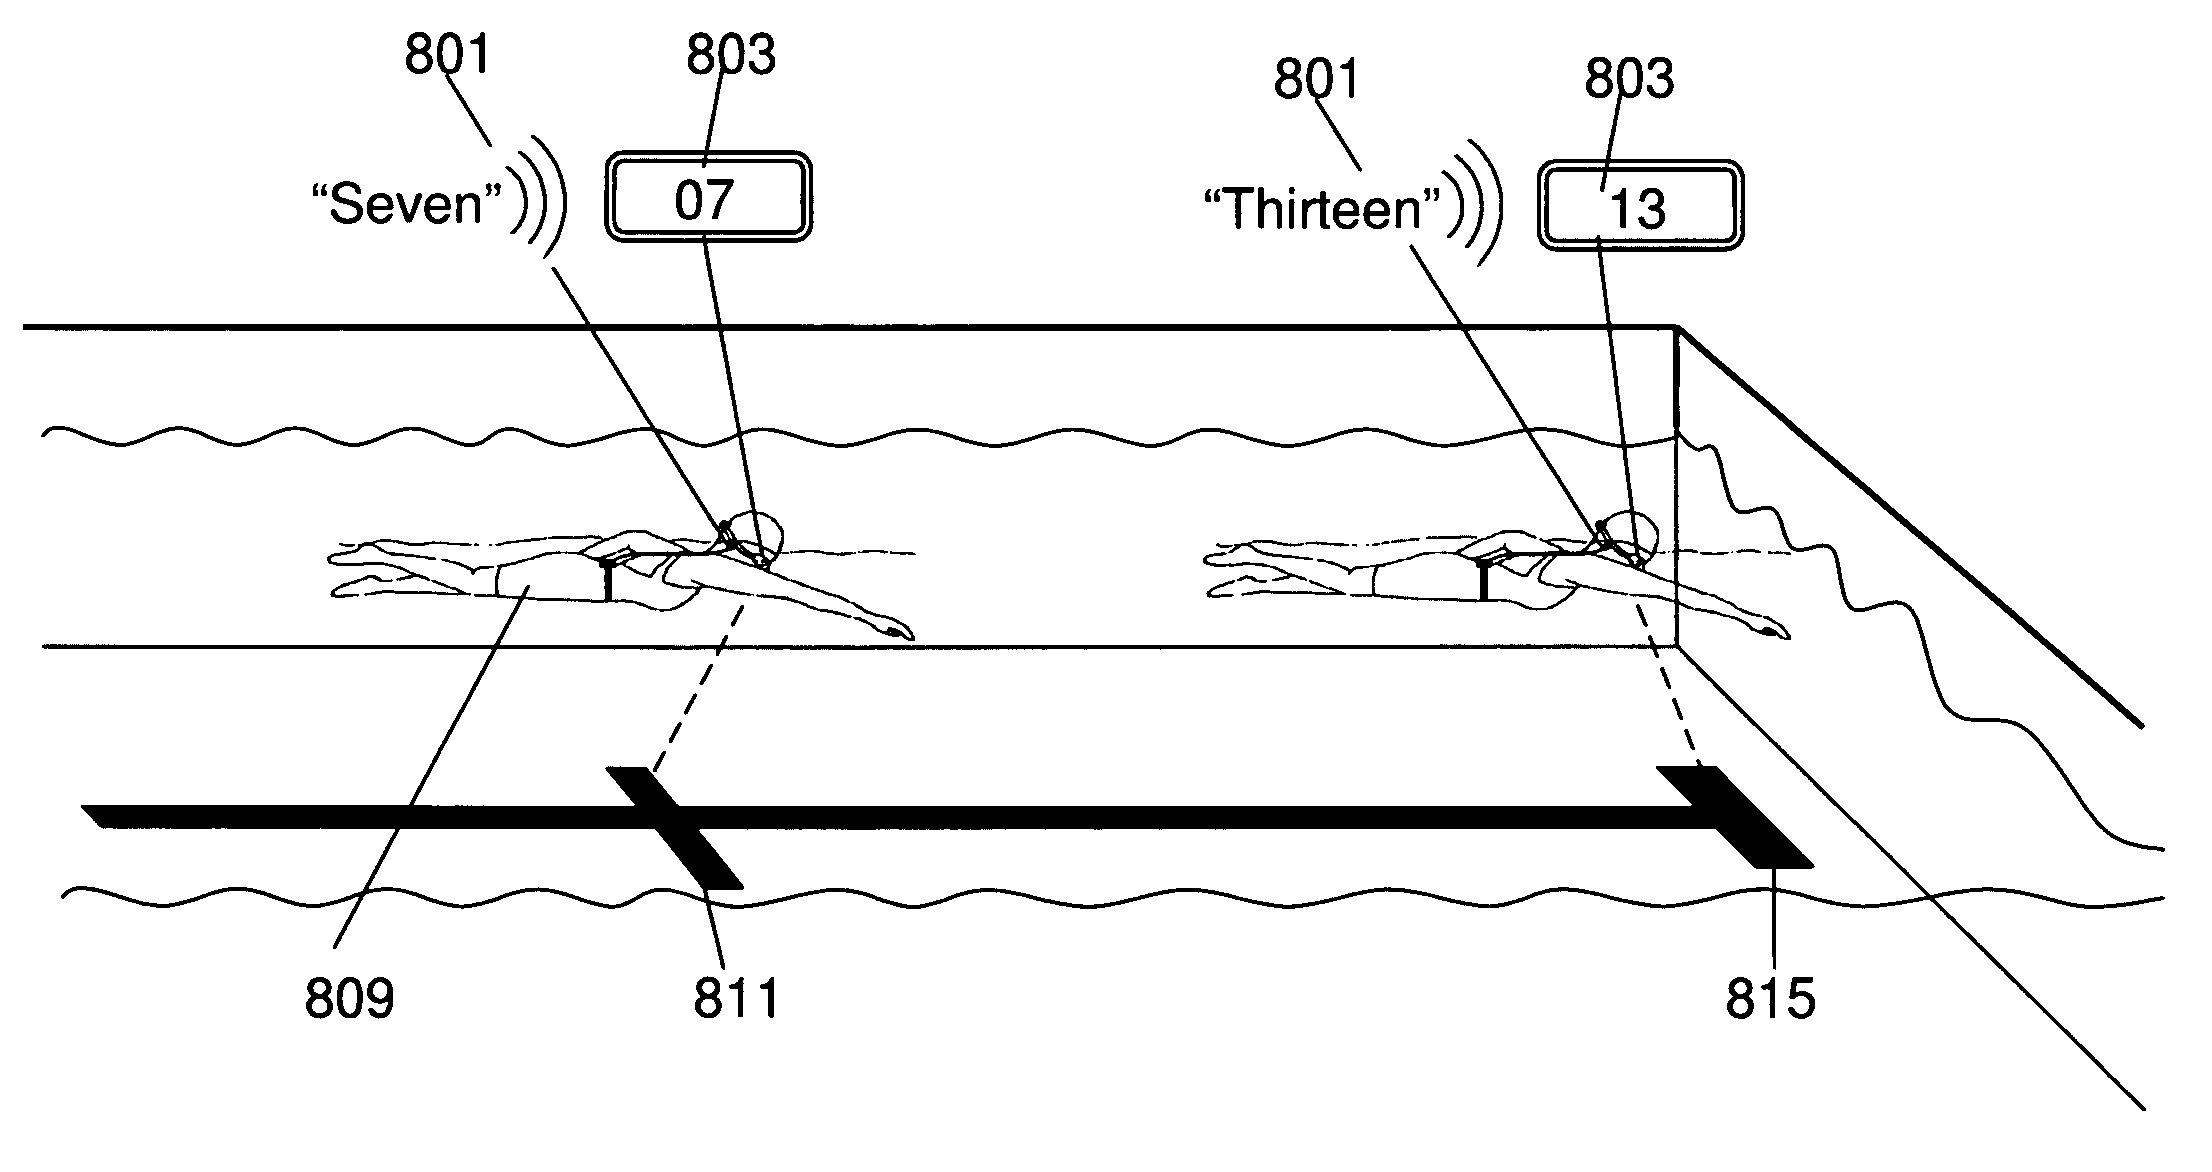 Real-time swimming monitor